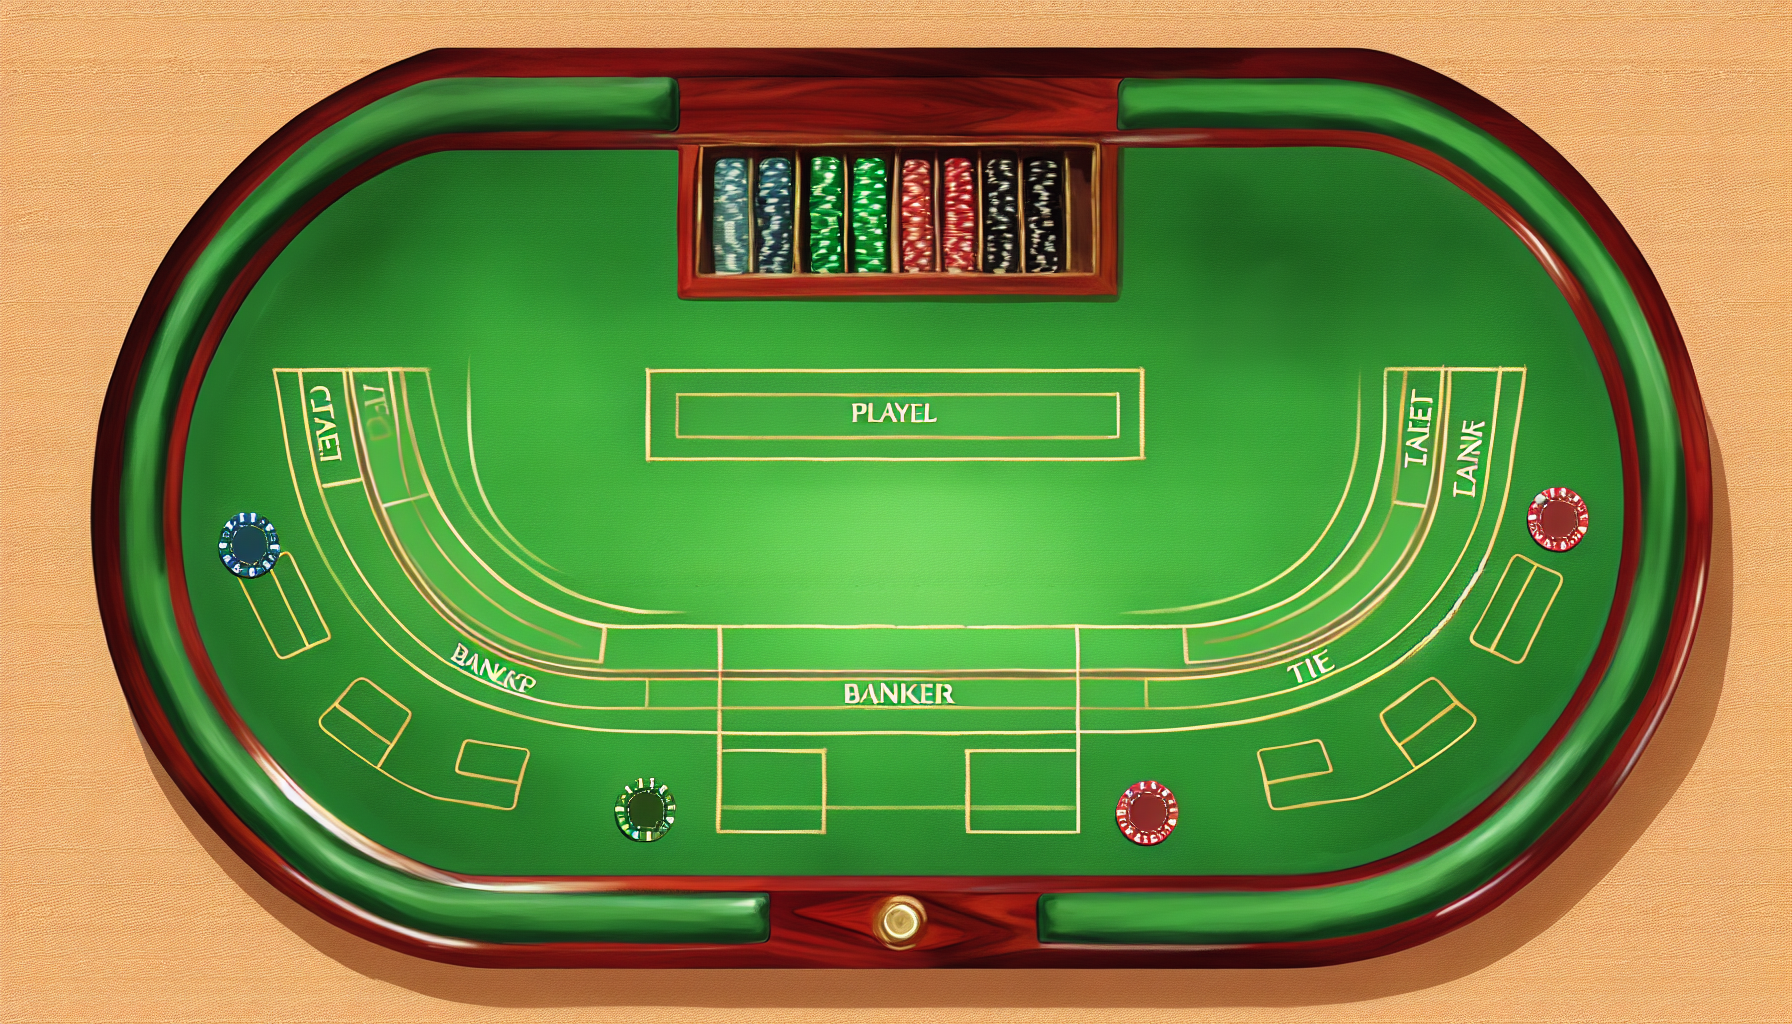 Baccarat table layout with designated betting areas for Player, Banker, and Tie